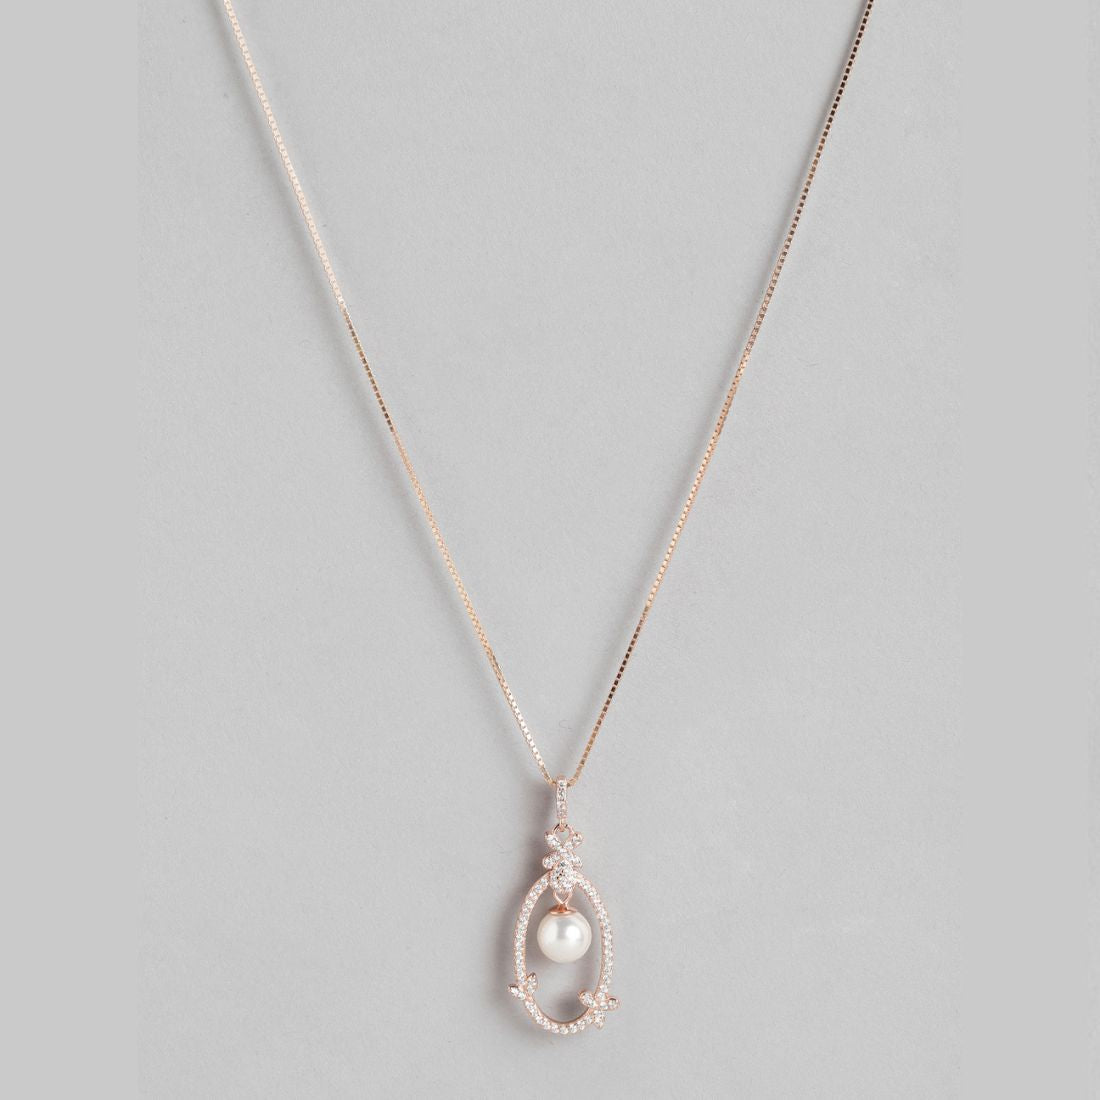 Graceful Allure Rose Gold Pearl & CZ 925 Sterling Silver Pendant with Chain